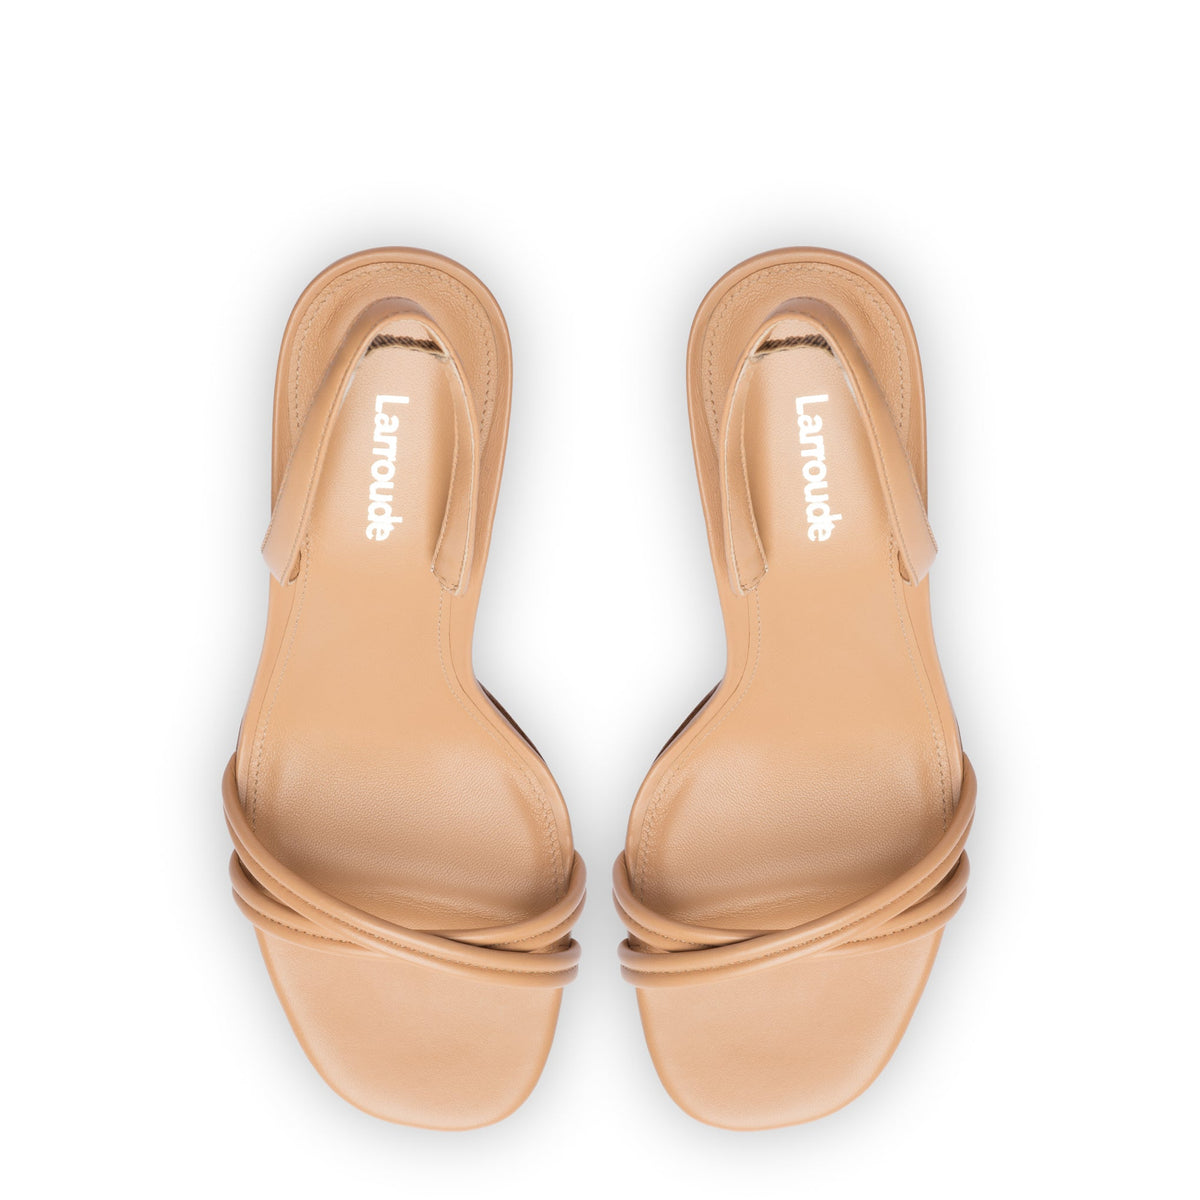 Annie Sandal In Tan Leather